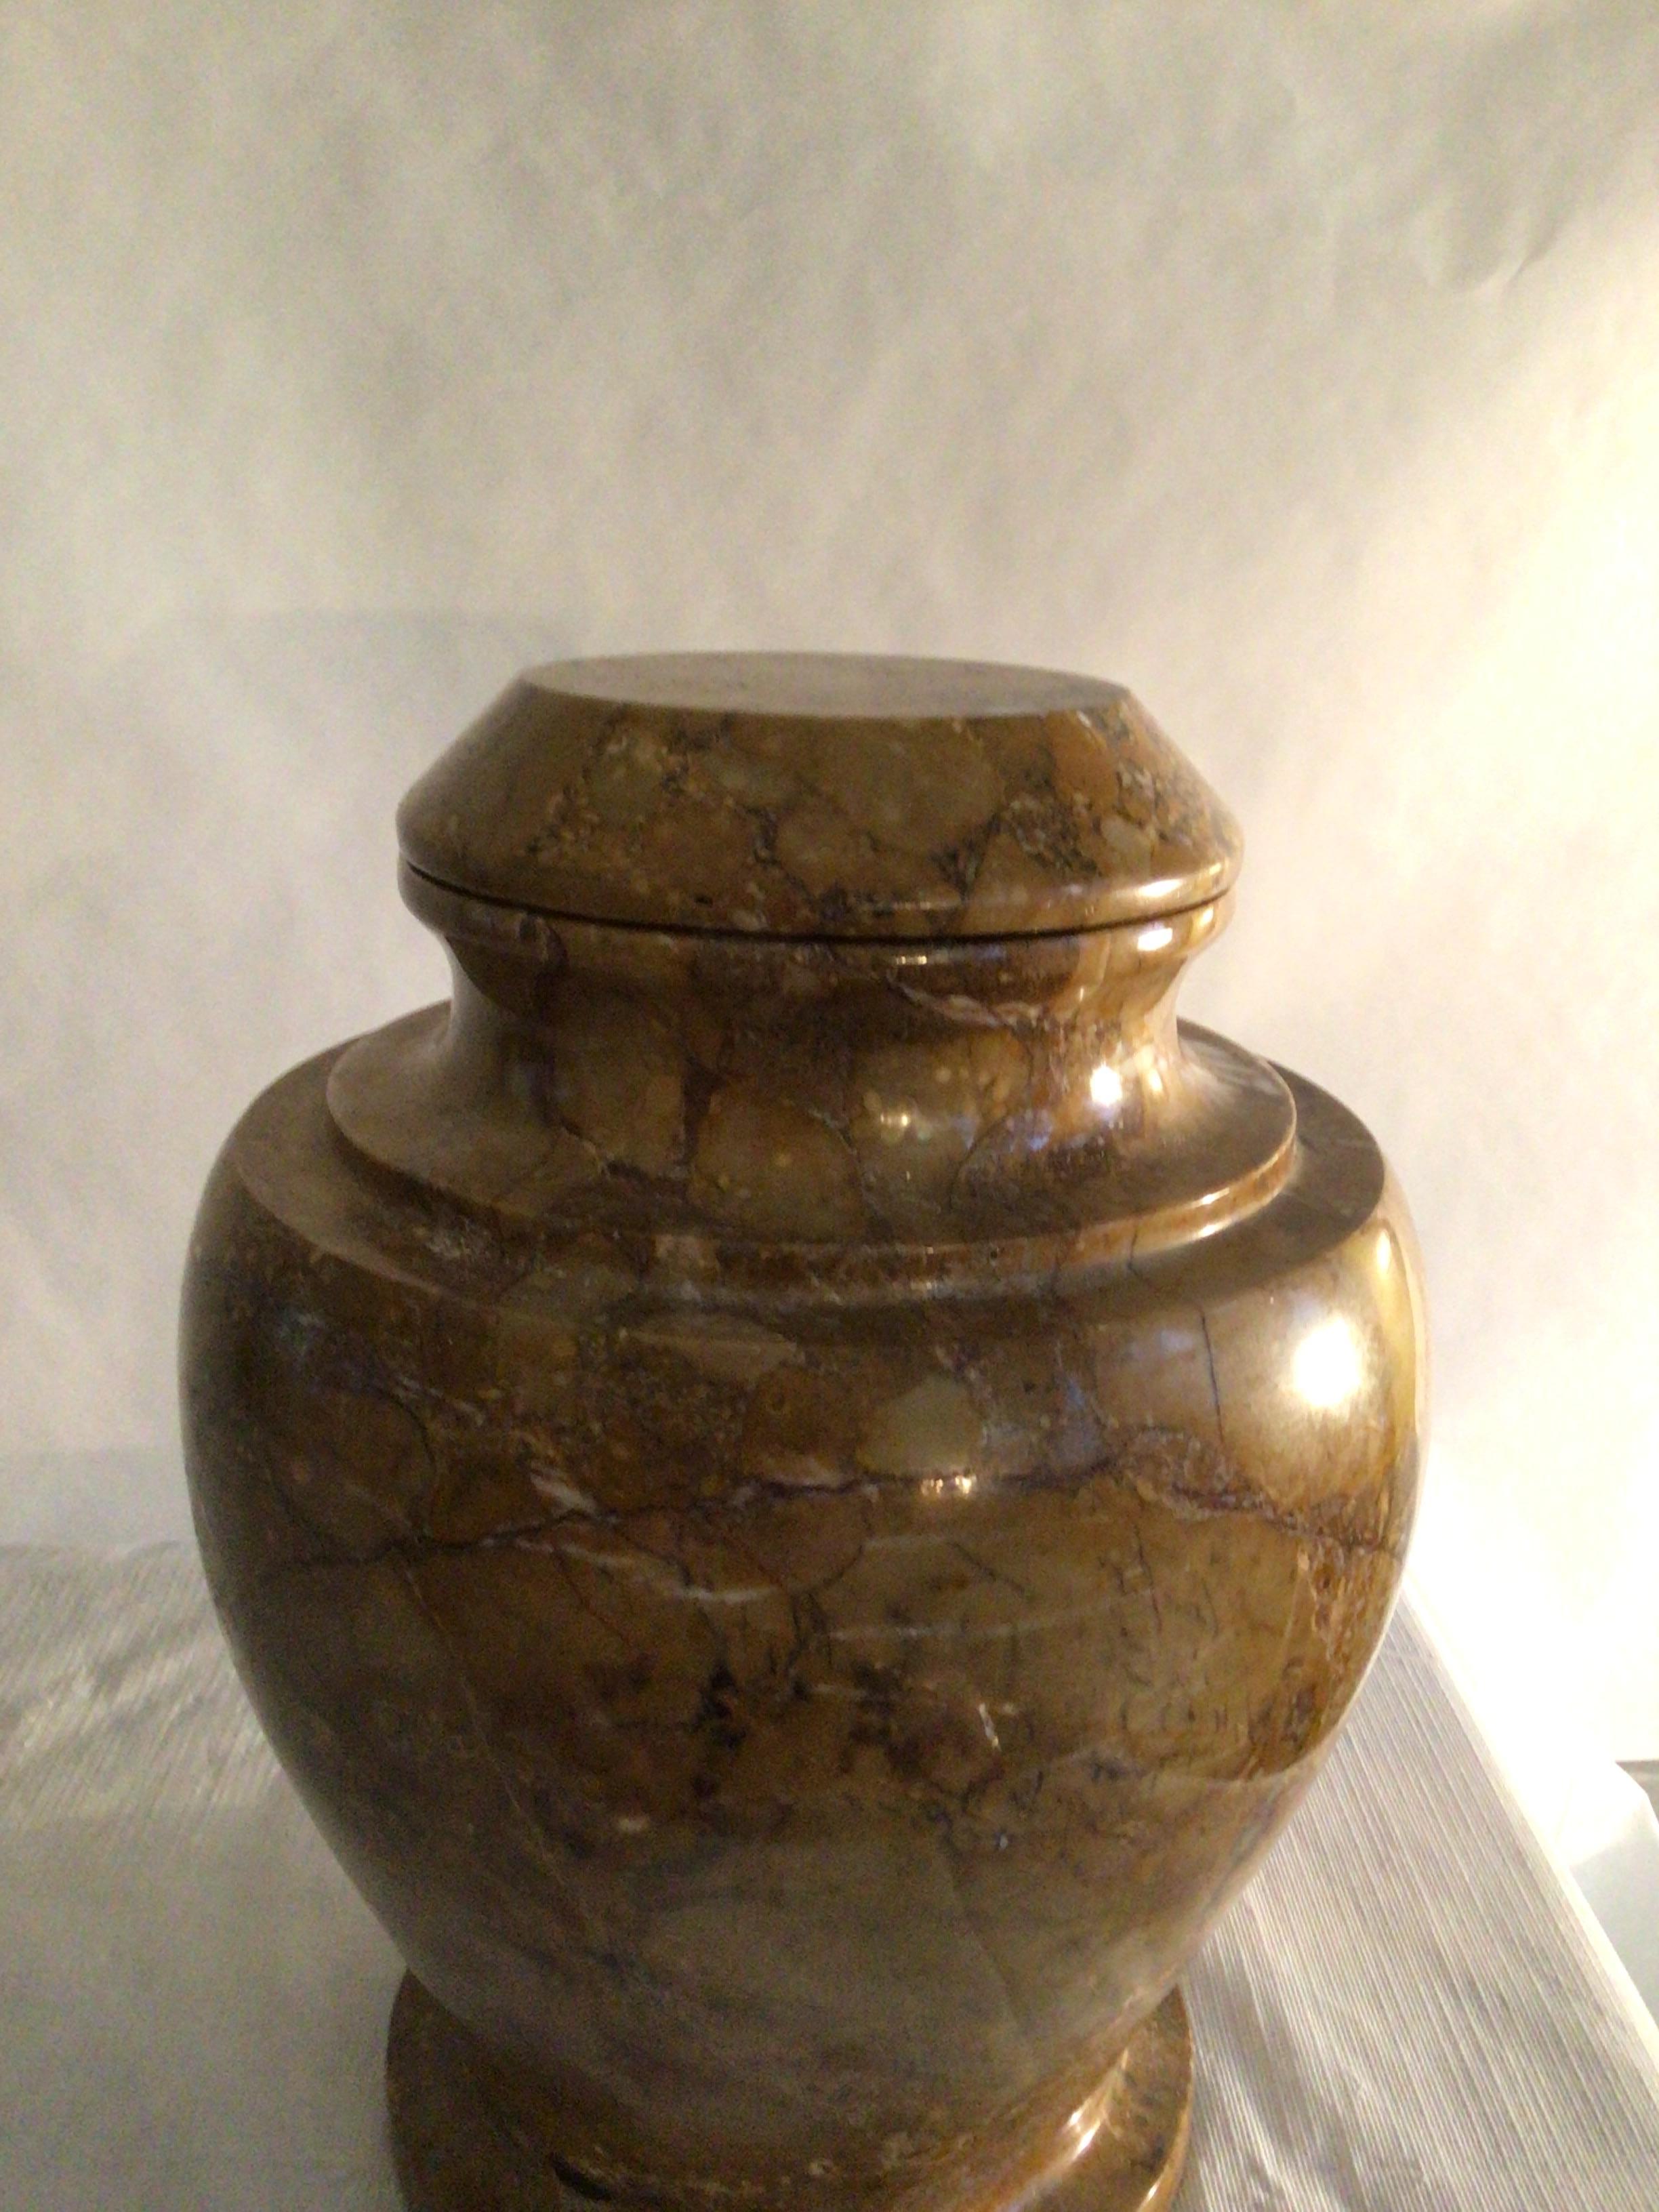 1970s Stone Jardiniere or Urn With Lid
The urn has varying shades of earth tones and pebbles that you expect to find on the shore and the stone means that you are getting a natural and unique item.